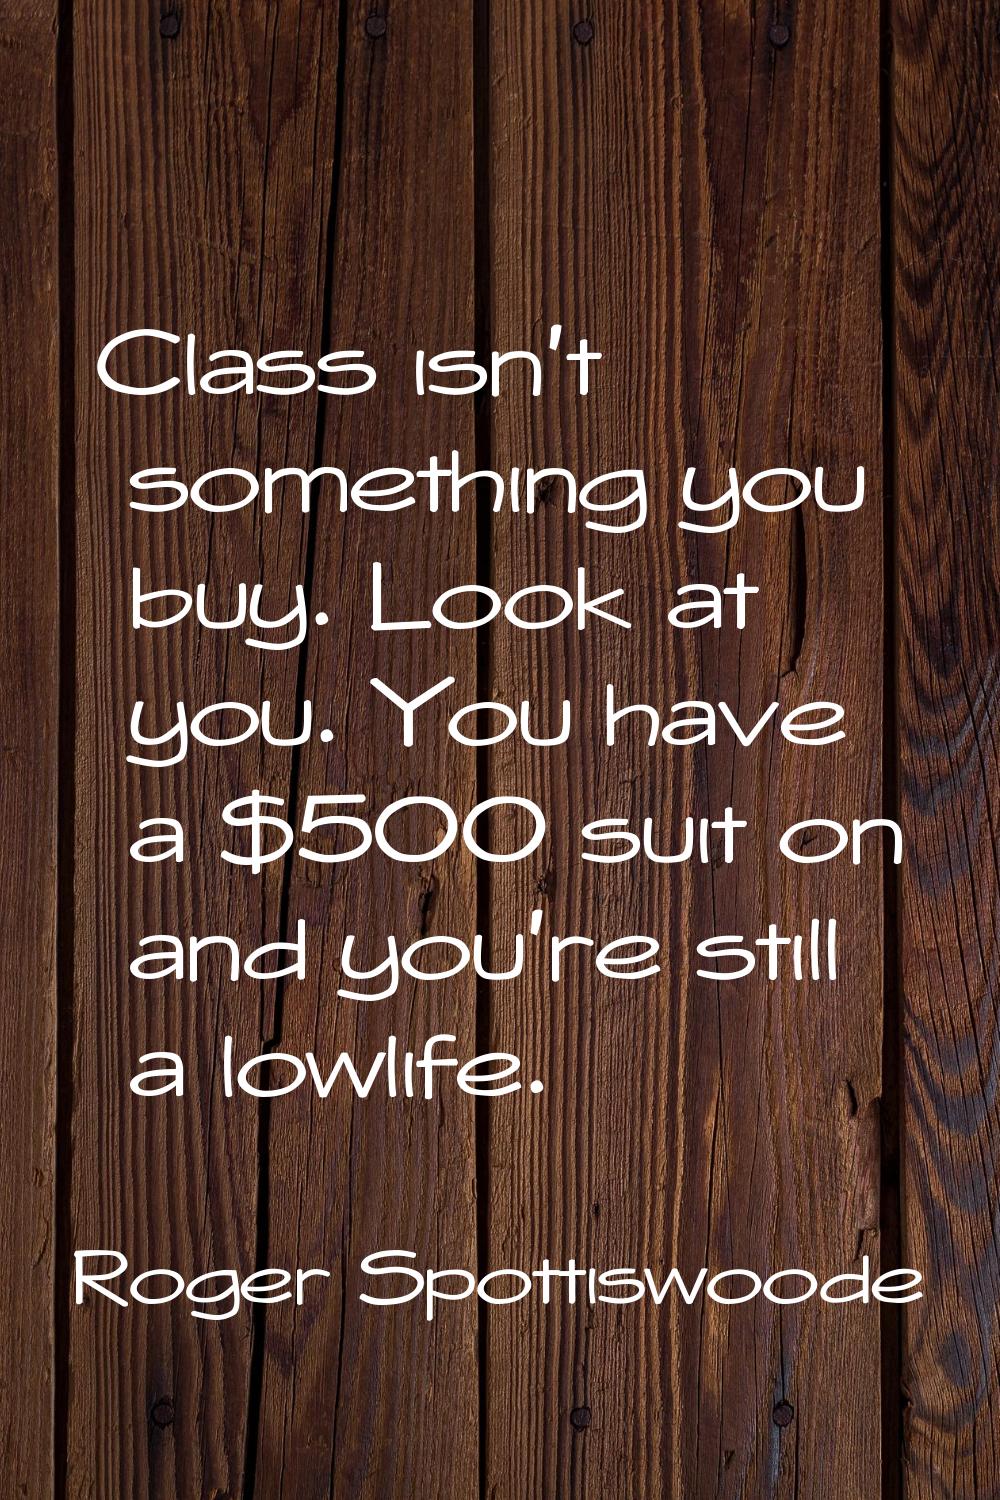 Class isn't something you buy. Look at you. You have a $500 suit on and you're still a lowlife.